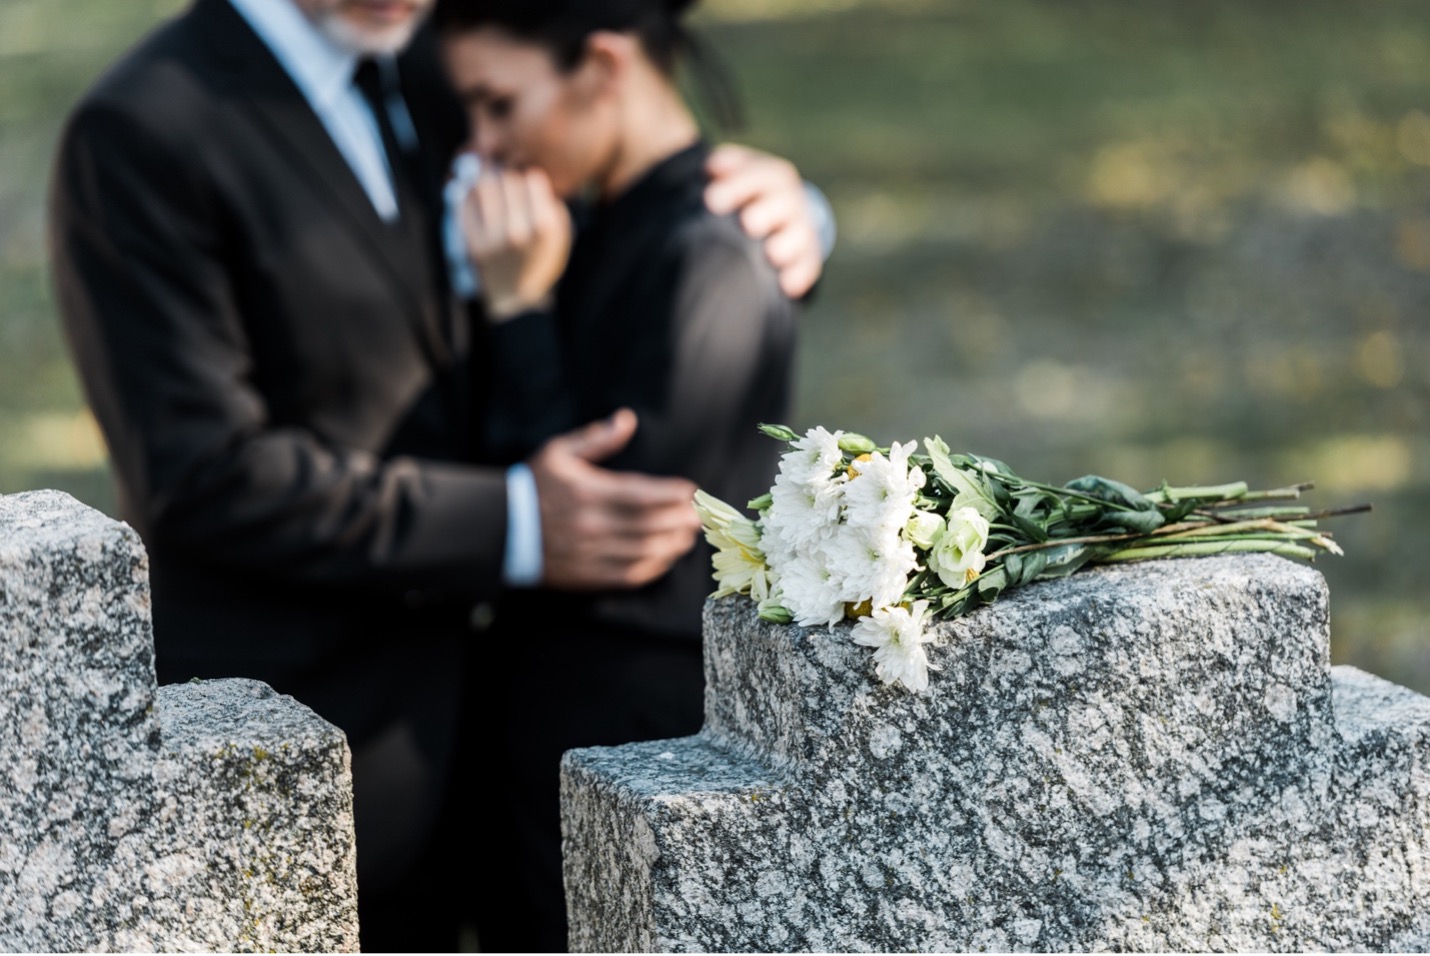 Two family members mourning standing by grave